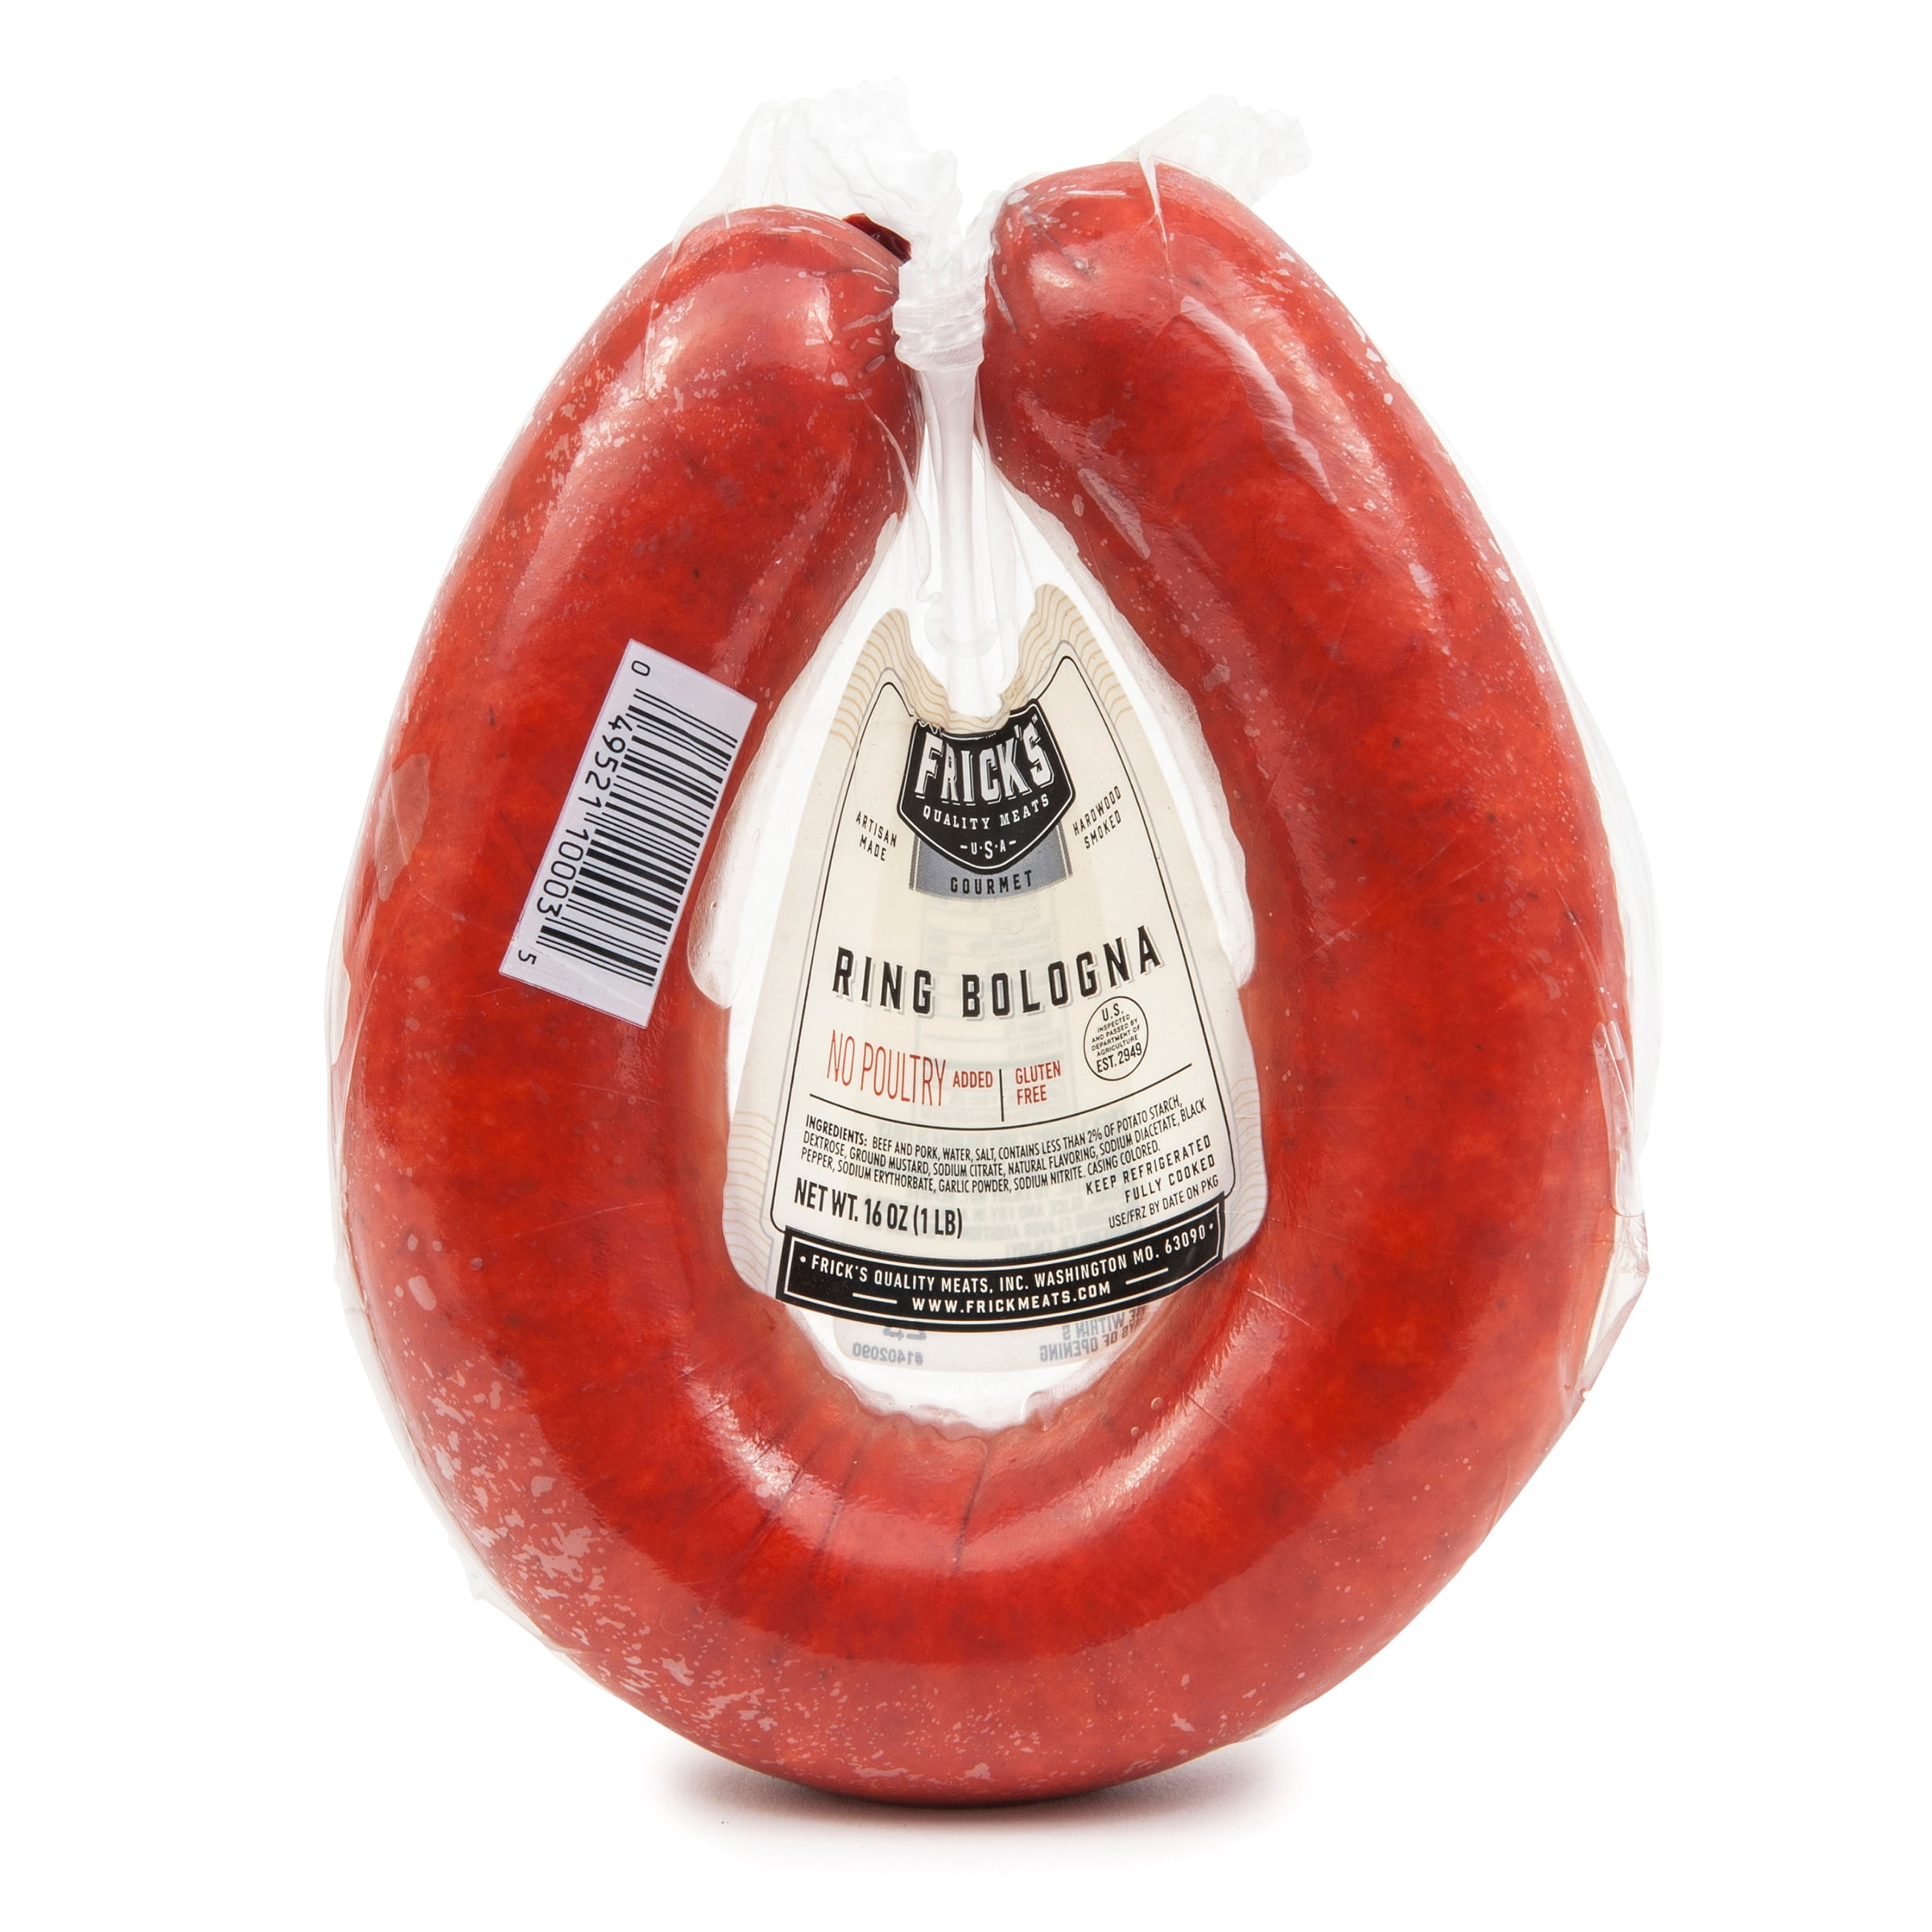 ALL NATURAL RING BOLOGNA – Midwest Prime Farms